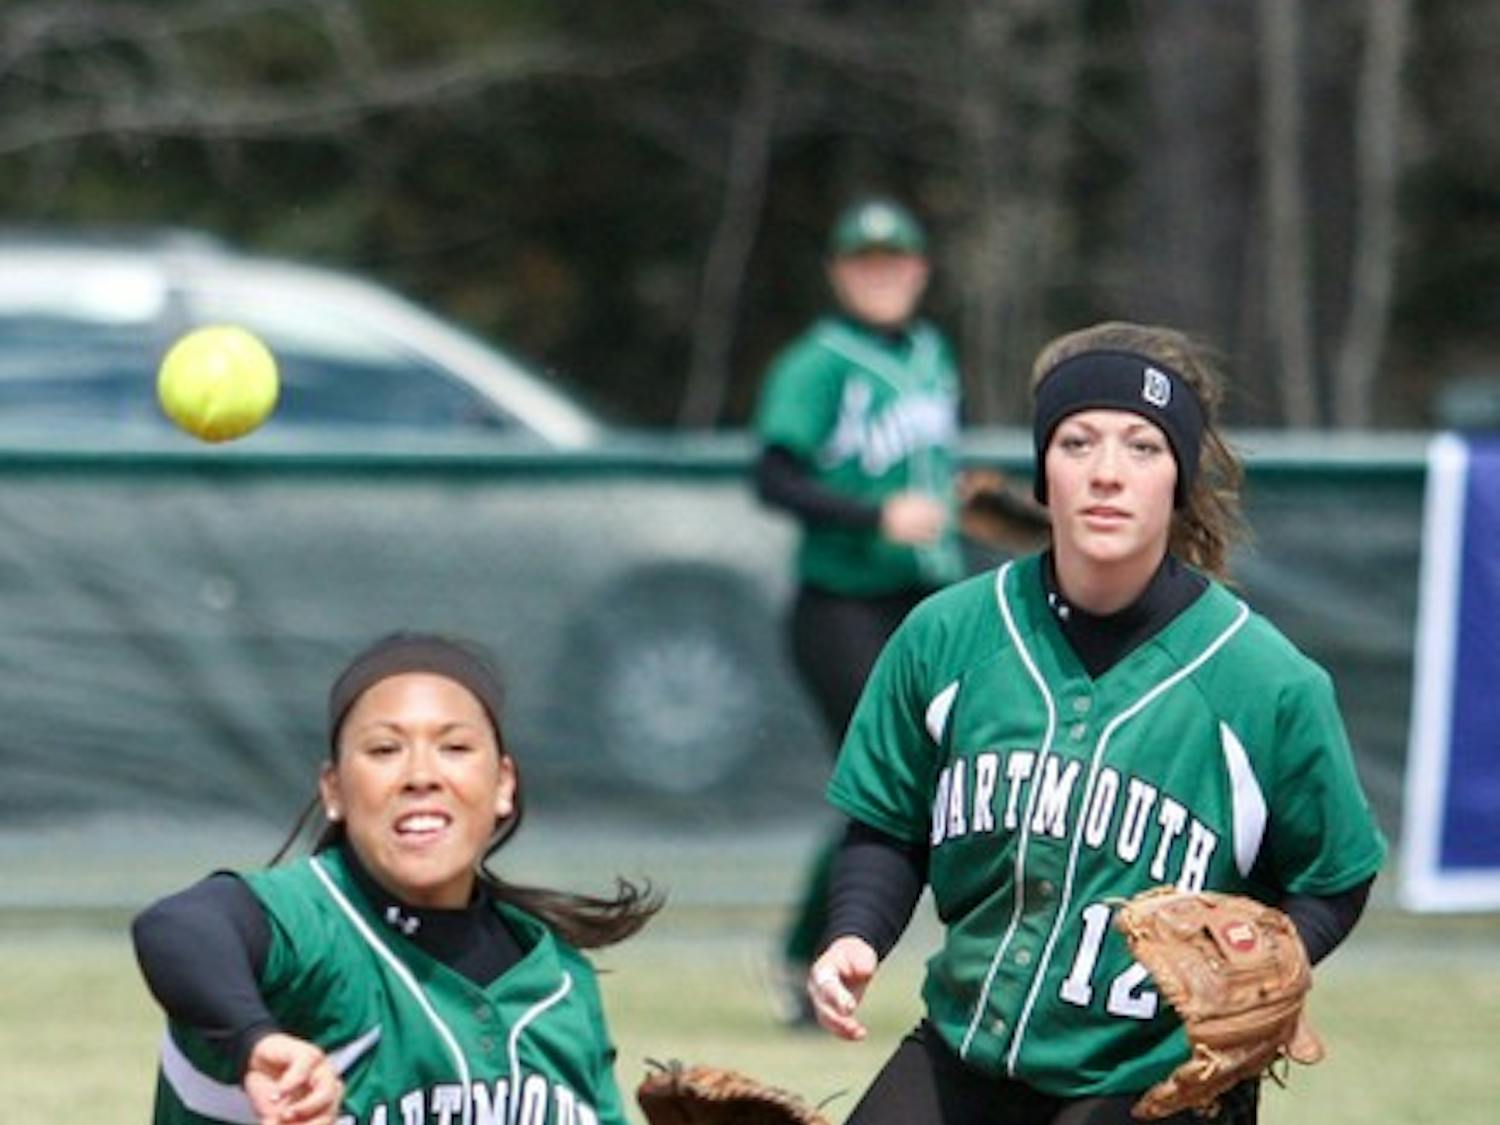 Christy Autin '10 and Kirsten Costello '10 combined for three hits in the Big Green's 5-1 victory against Cornell, Dartmouth's lone win in the series.